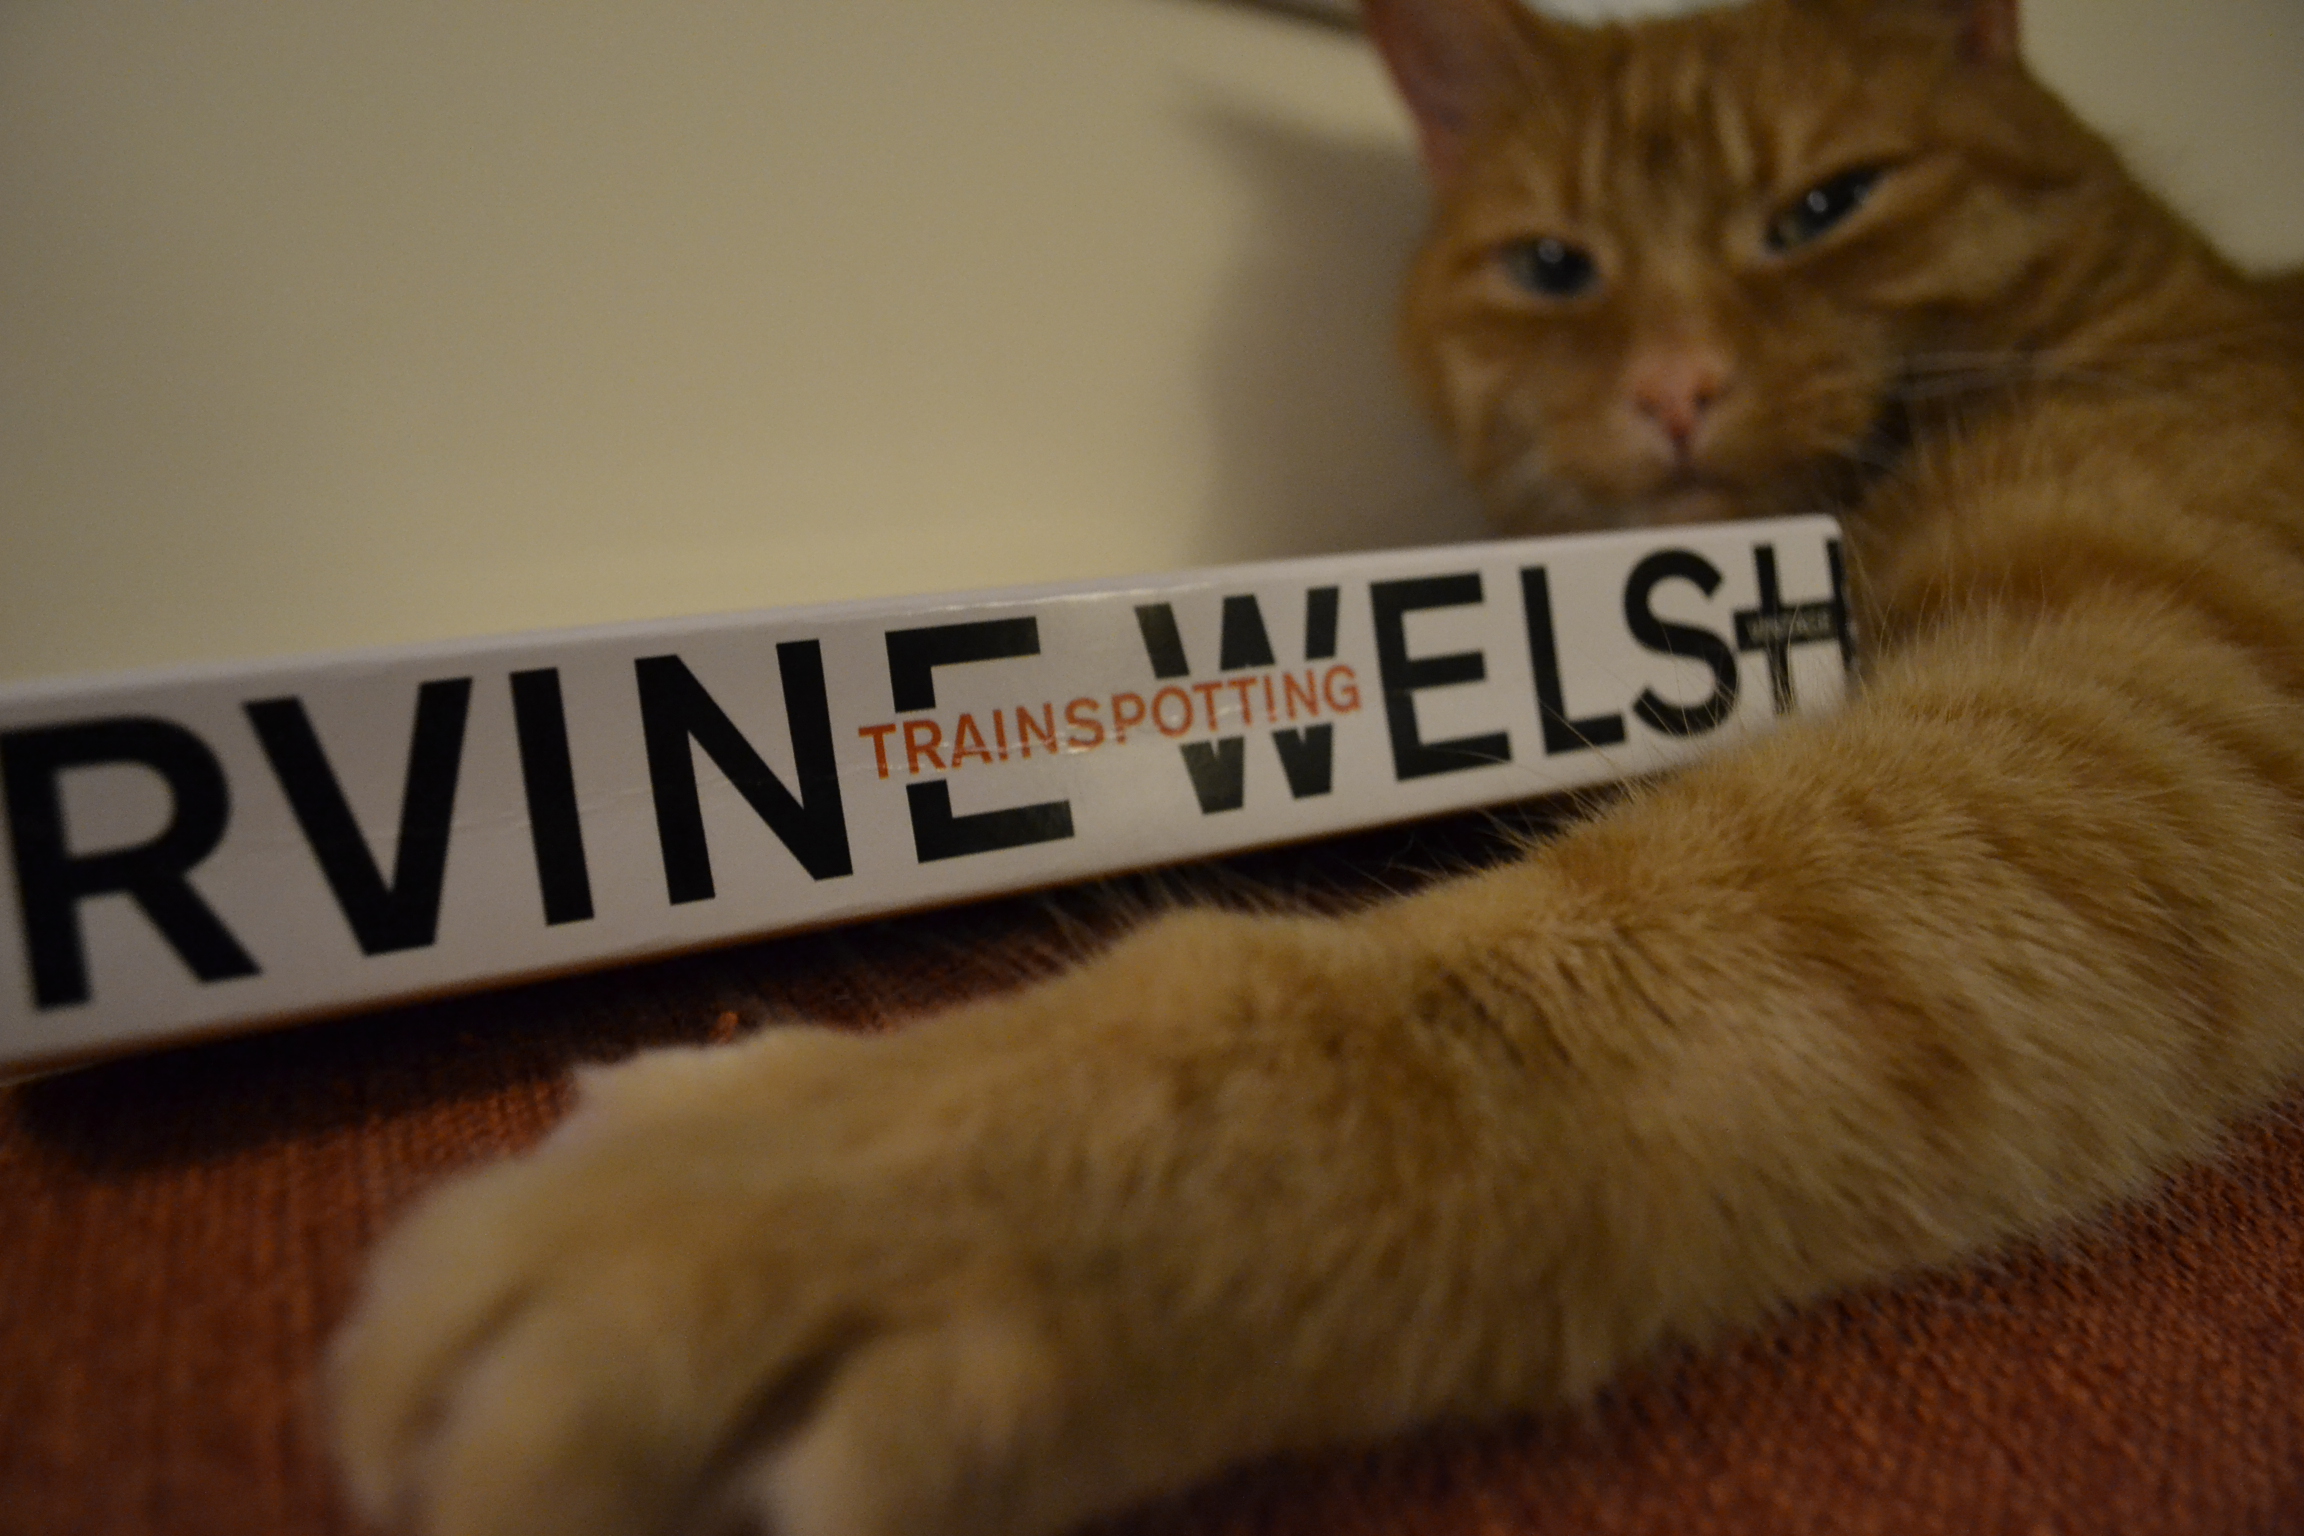 An orange tabby extends a paw along the spine of Irvine Welsh's Trainspotting.